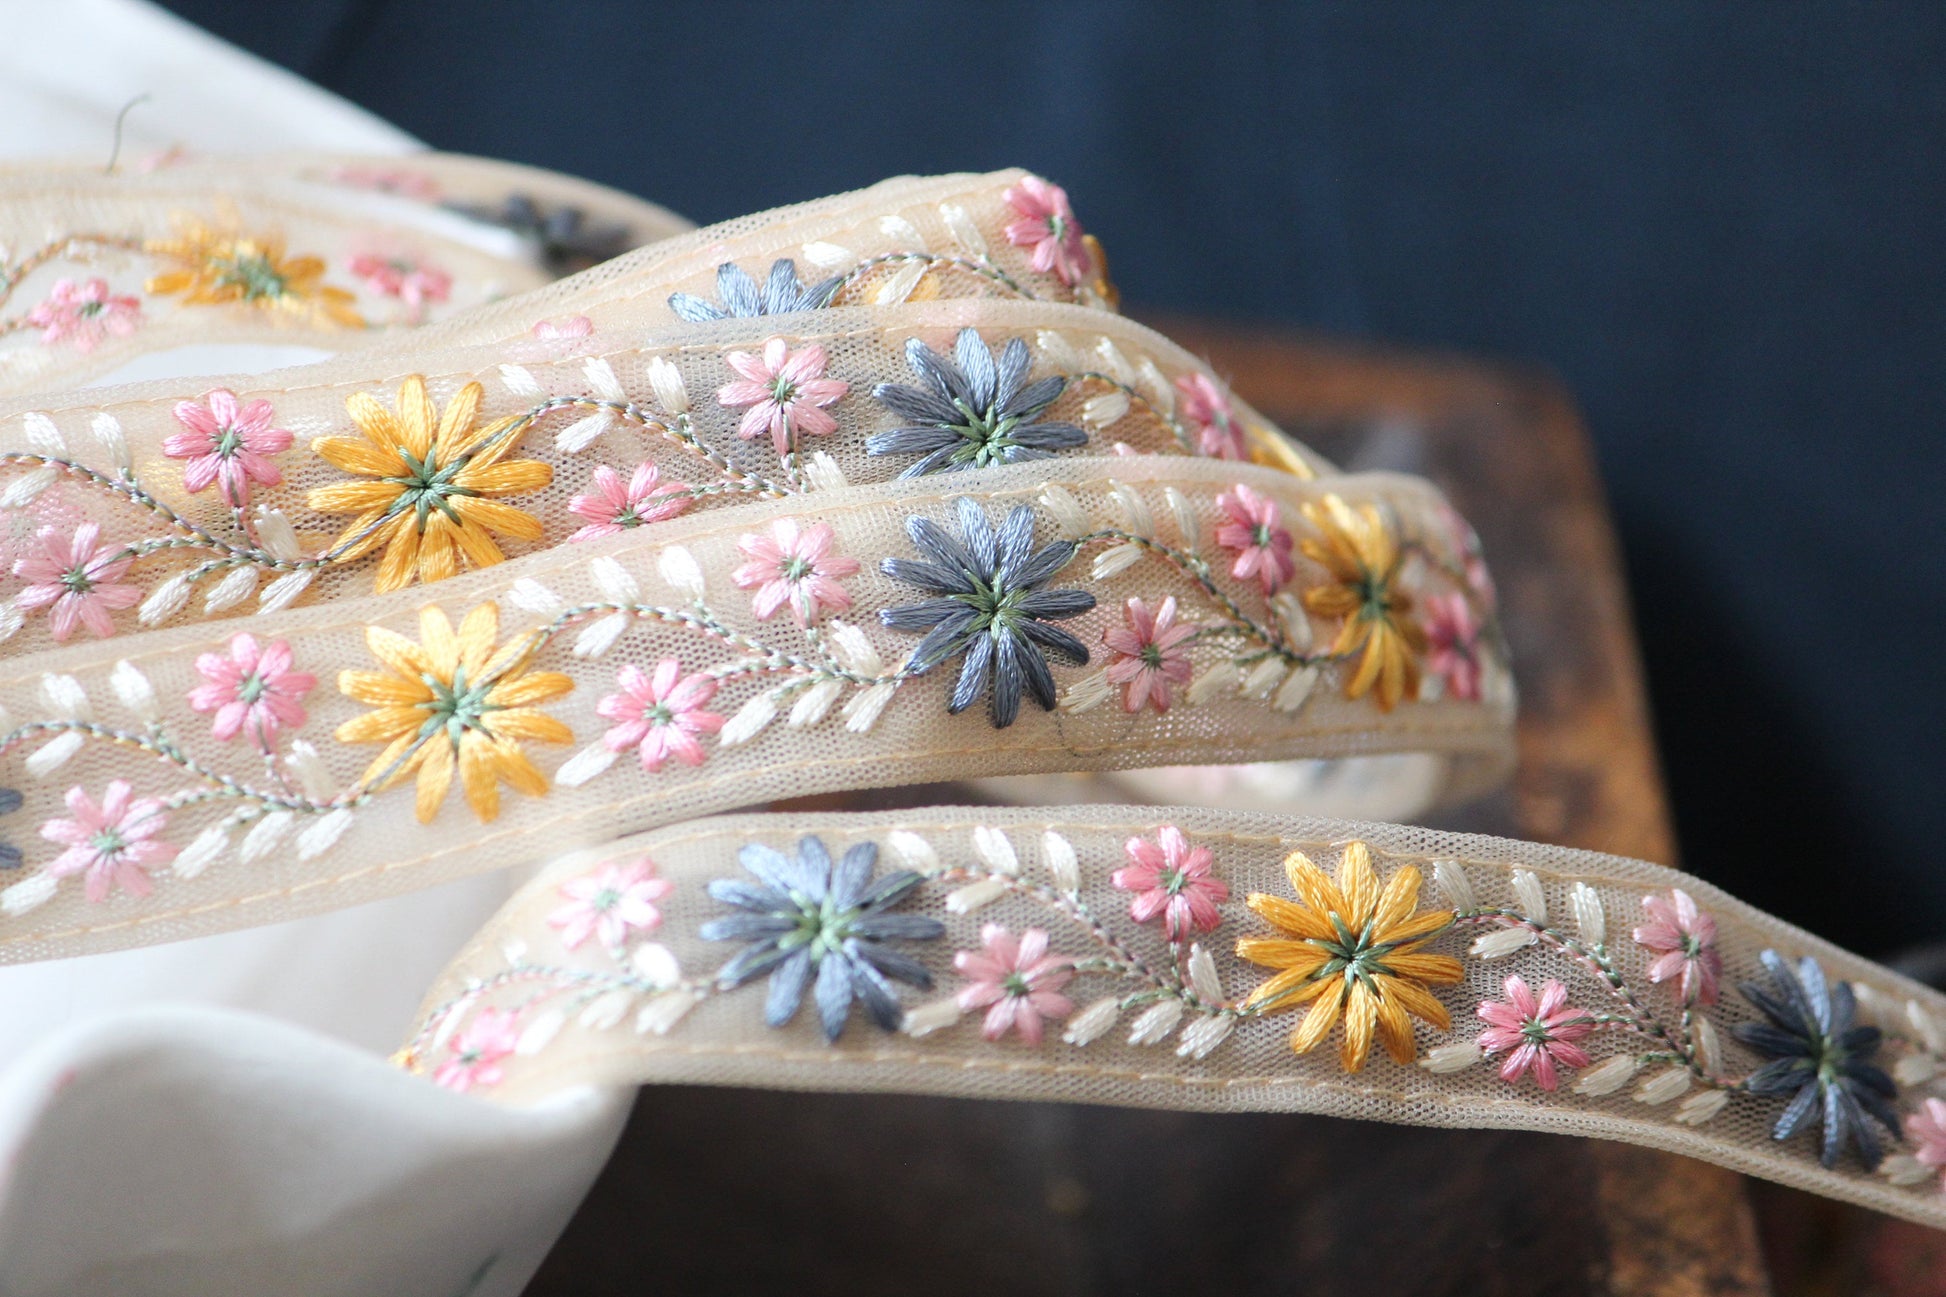 1 yard Floral Embroidered Ribbon Trim